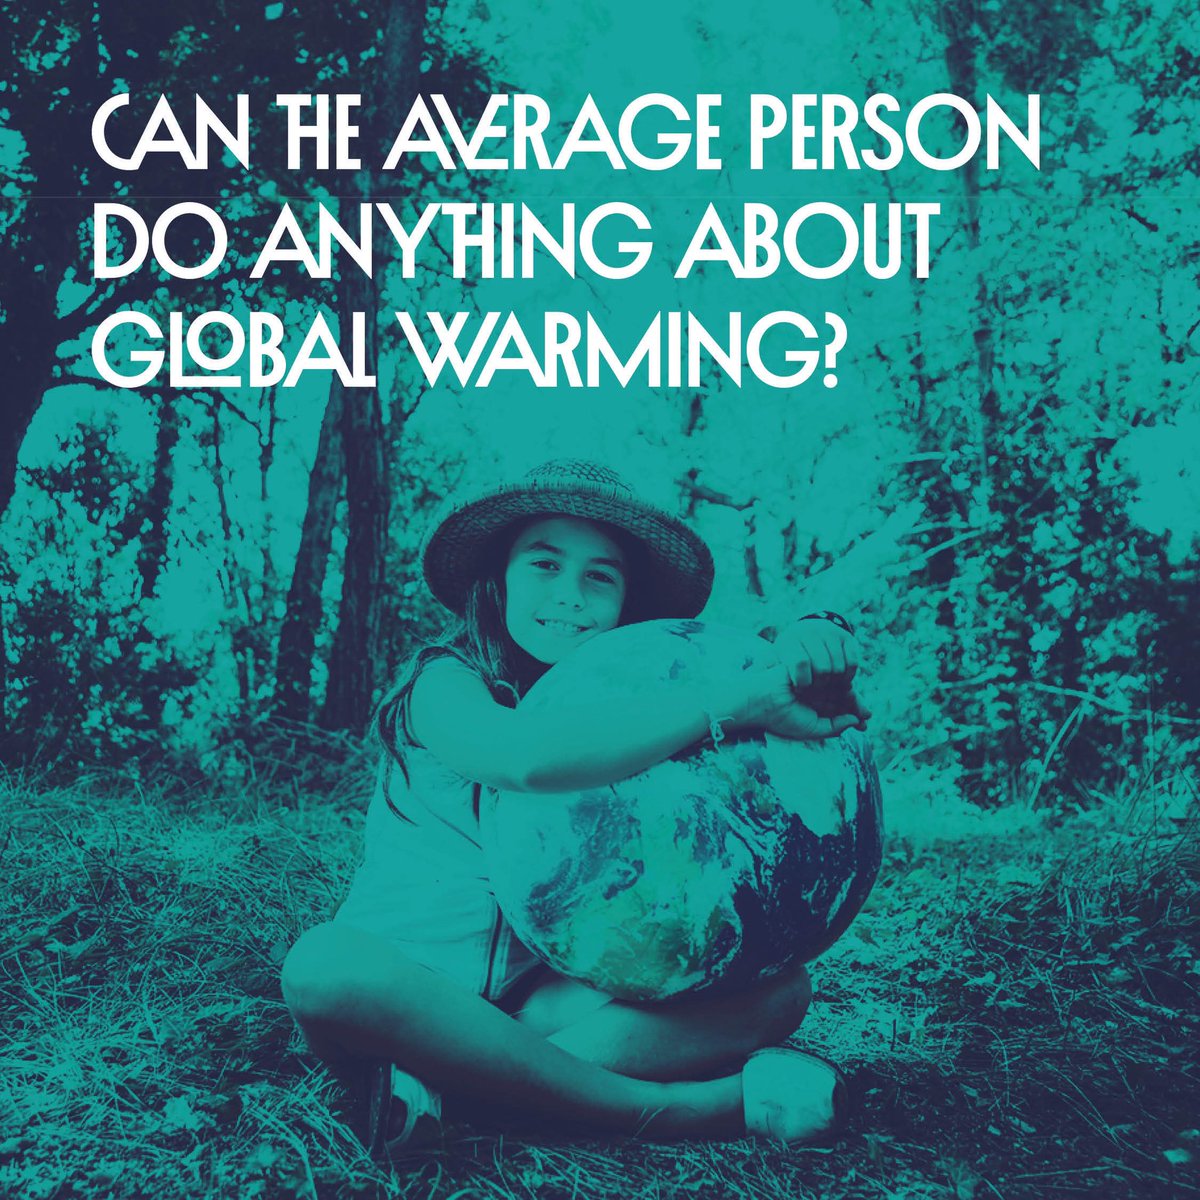 The global climate crisis is becoming increasingly urgent. Last year was the hottest on record. Even more worrying is the fact that only 37% of Americans think that addressing climate change should be a top priority. Find out more in our latest blog. 🌍🤲 alwaysbecontent.com/can-the-averag…